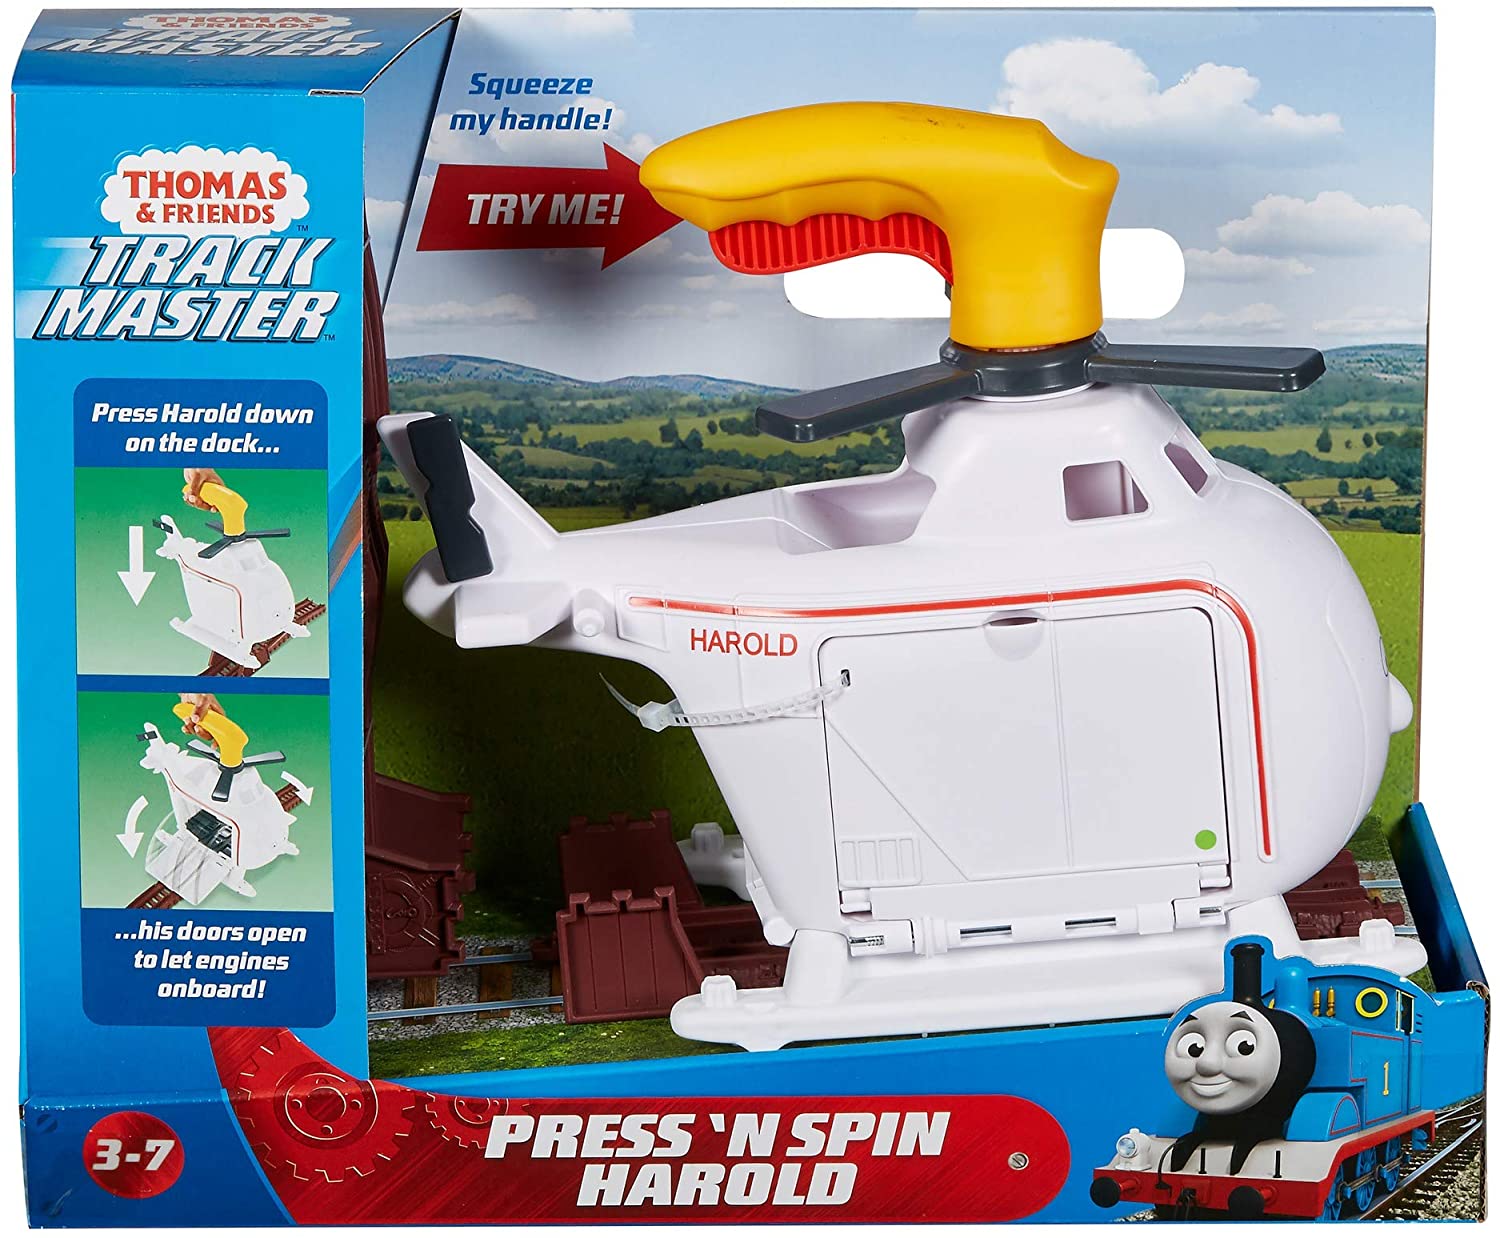 Thomas & Friends Press 'n Spin Harold (with Spinning Propellers) $9.49 - Amazon